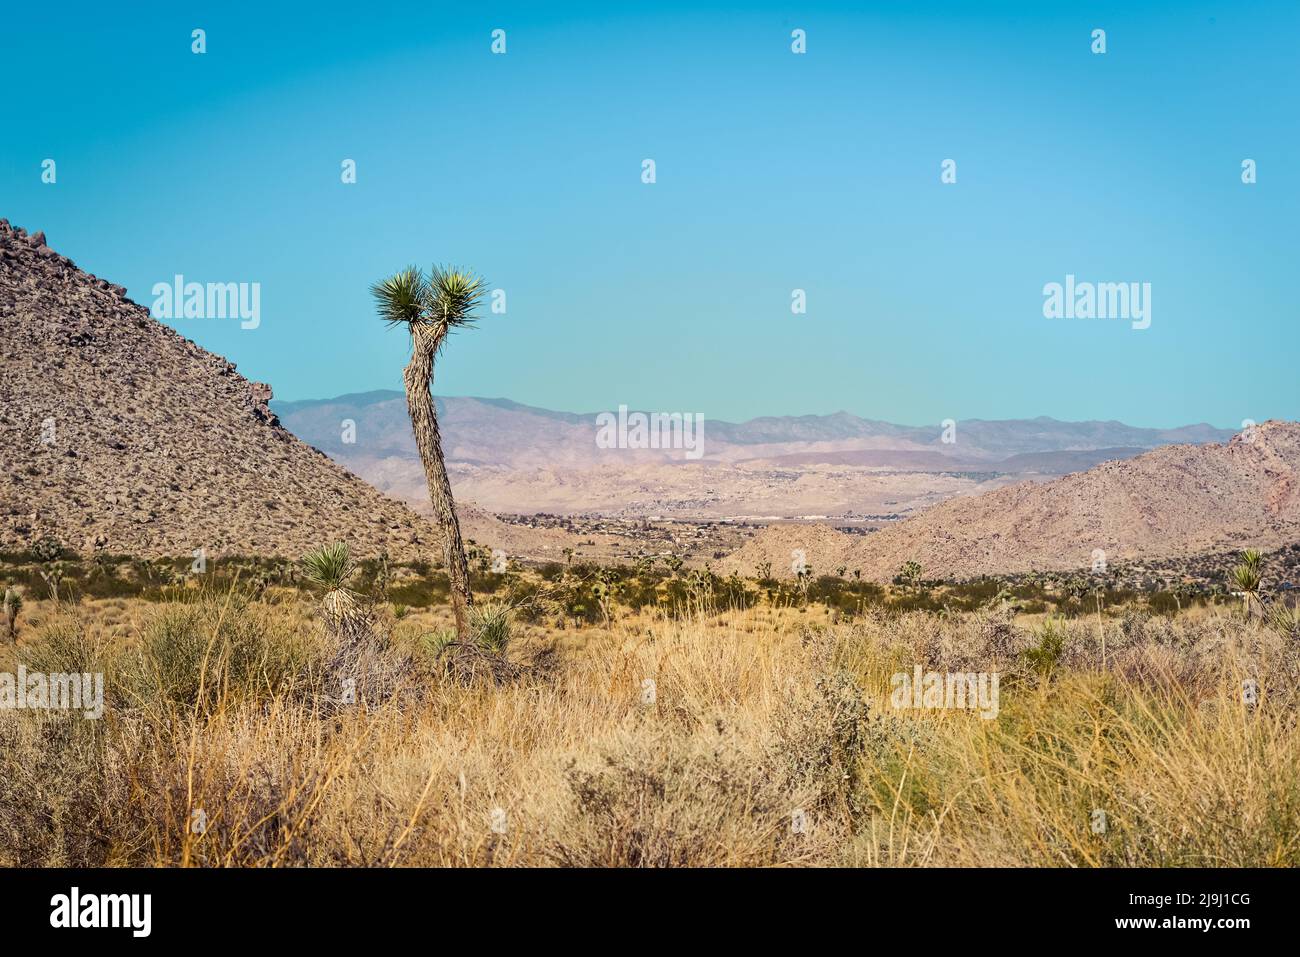 A Joshua tree stands solo amongst desert landscape overlooking the Coachella Valley, in the Joshua Tree National Park, in the Mojave desert, CA, USA Stock Photo